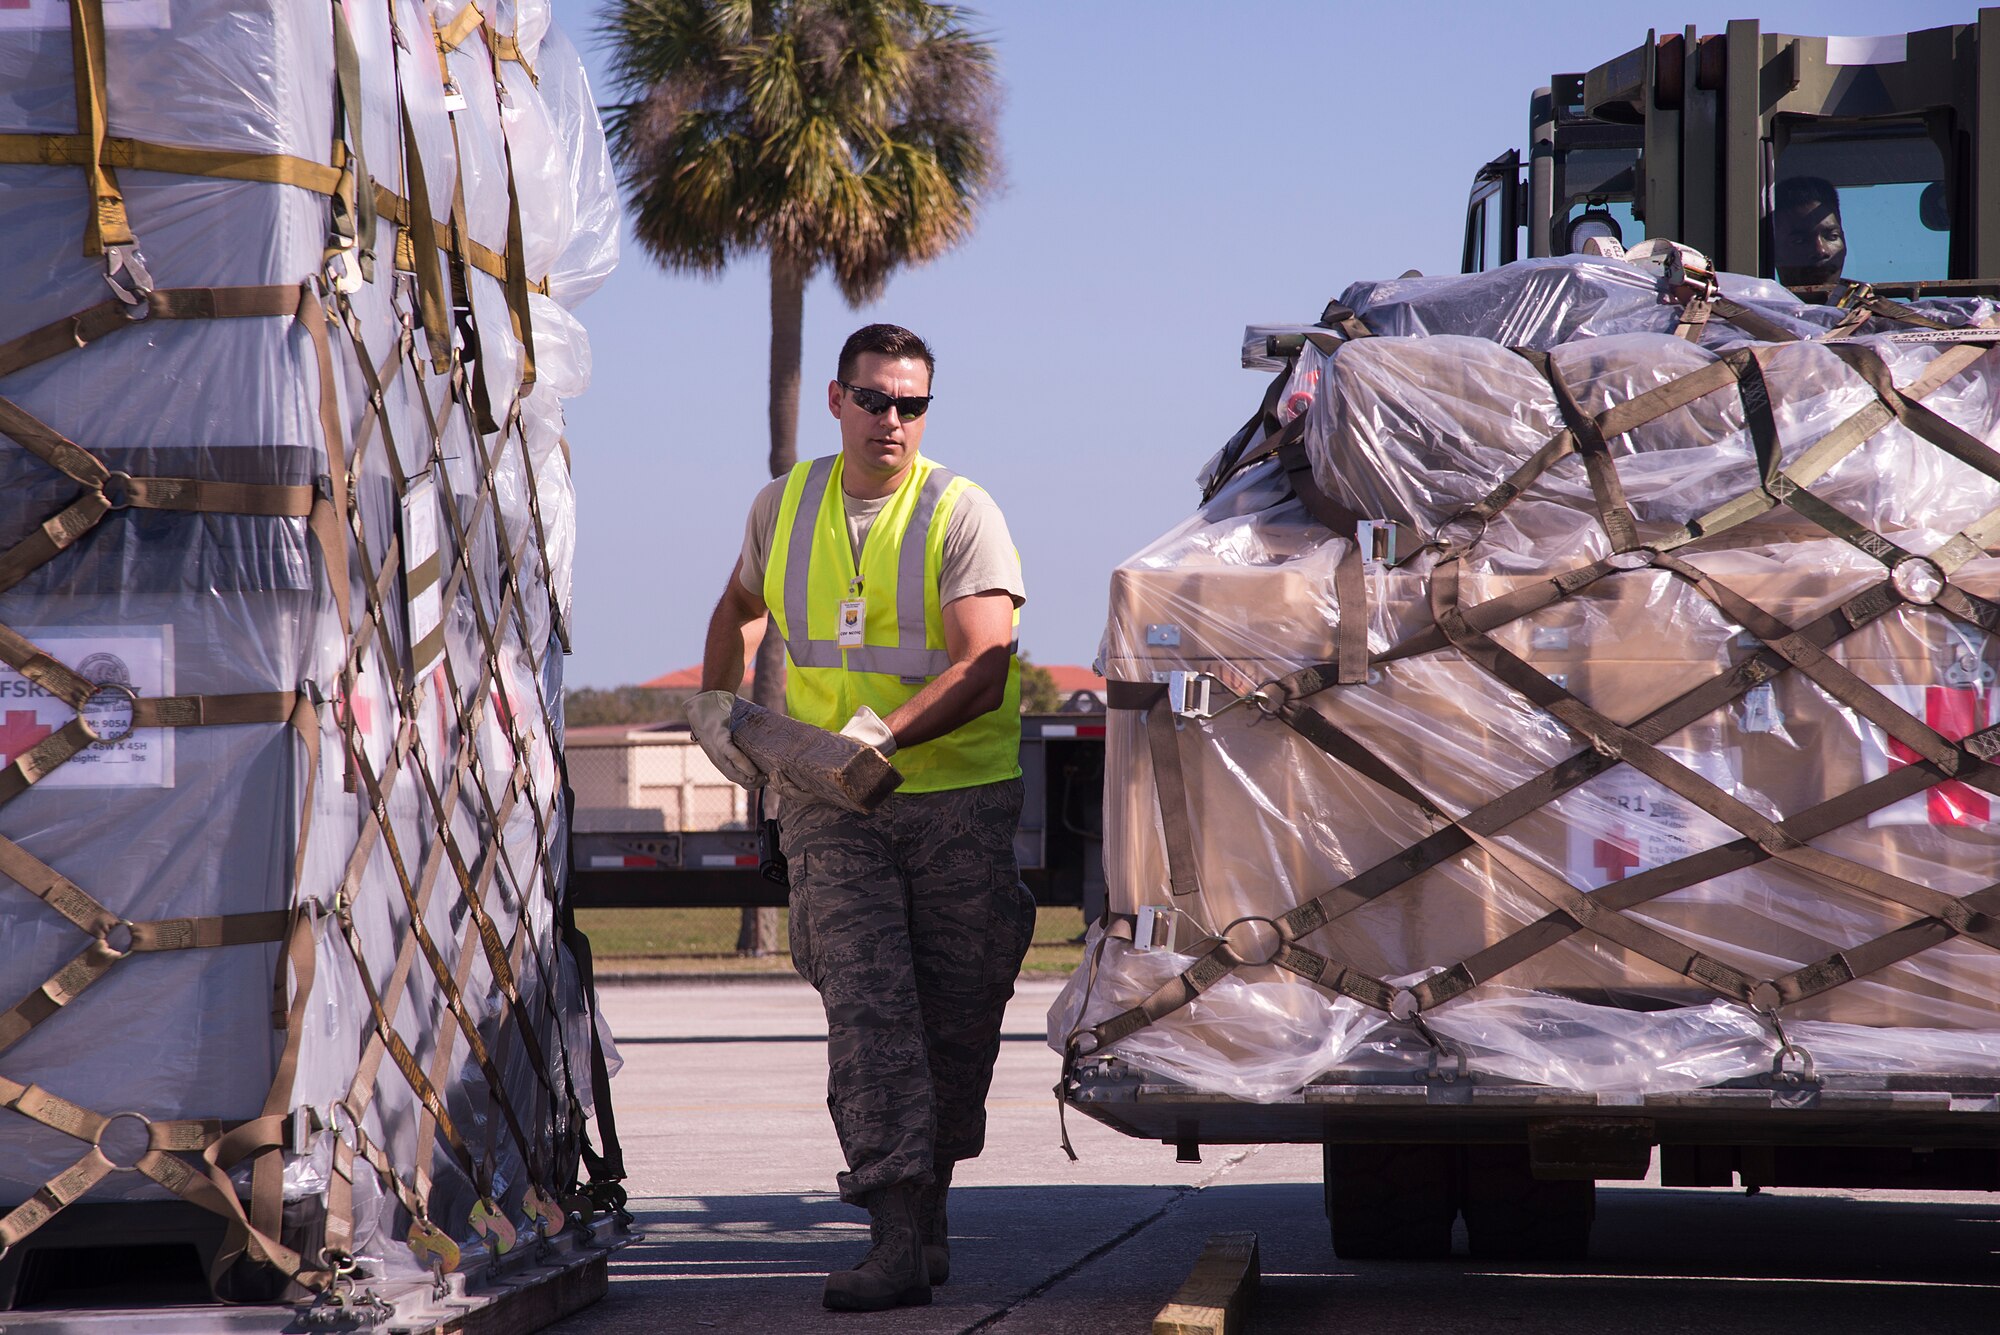 U.S. Air Force Master Sgt. Christopher Kotzur, 6th Logistics Readiness Squadron (LRS) personal property superintendent, moves dunnage under the lifted cargo during an operational readiness exercise Feb. 8, 2019 at MacDill Air Force Base, Fla. Airmen from the 6th LRS ensure cargo is packed safely, weighed and logged before deploying the equipment pallets with their respective units, highlighting the units capability to support contingency operations. (U.S. Air Force photo by Senior Airman Heather Fejerang)